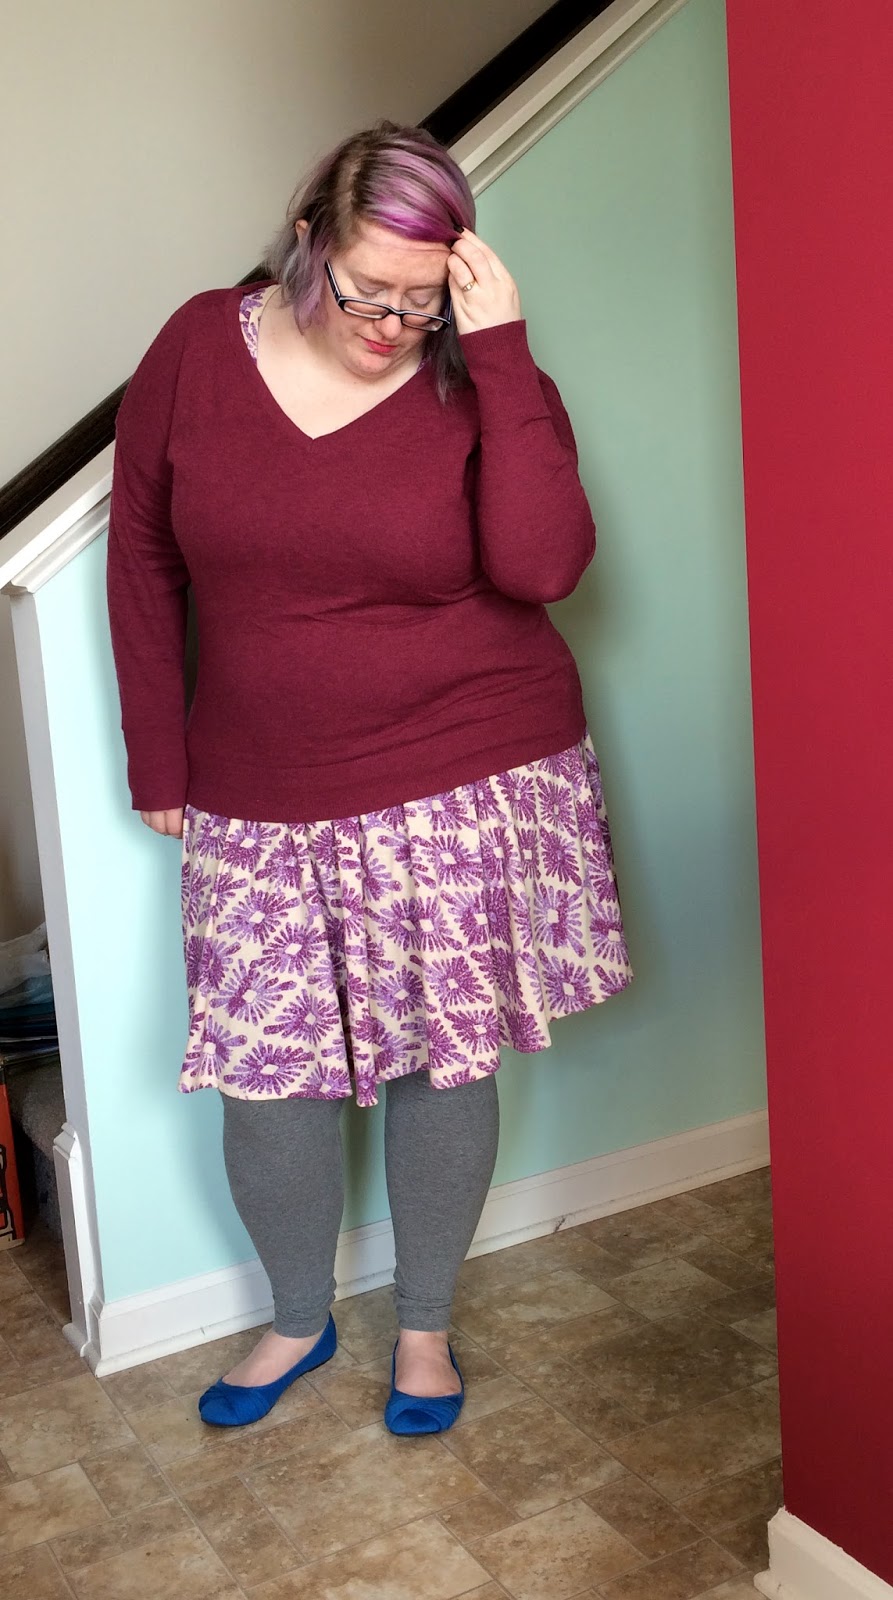 Lularoe Disappointment: The Ugly Truth About LuLaRoe - This Tiny